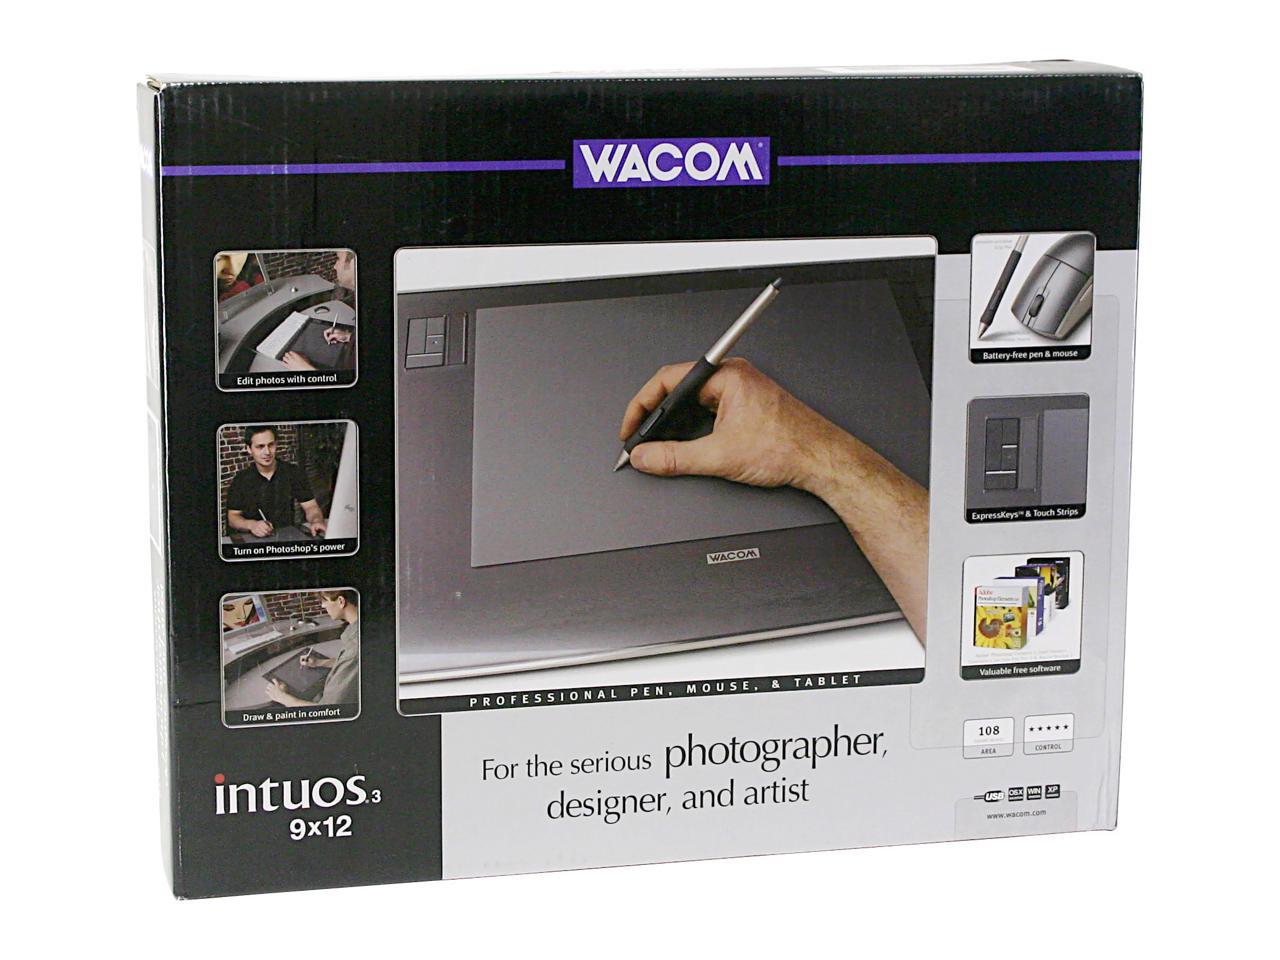 Wacom INTUOS3 9x12 Graphics tablet PTZ-930 LARGE for all Macs Windows